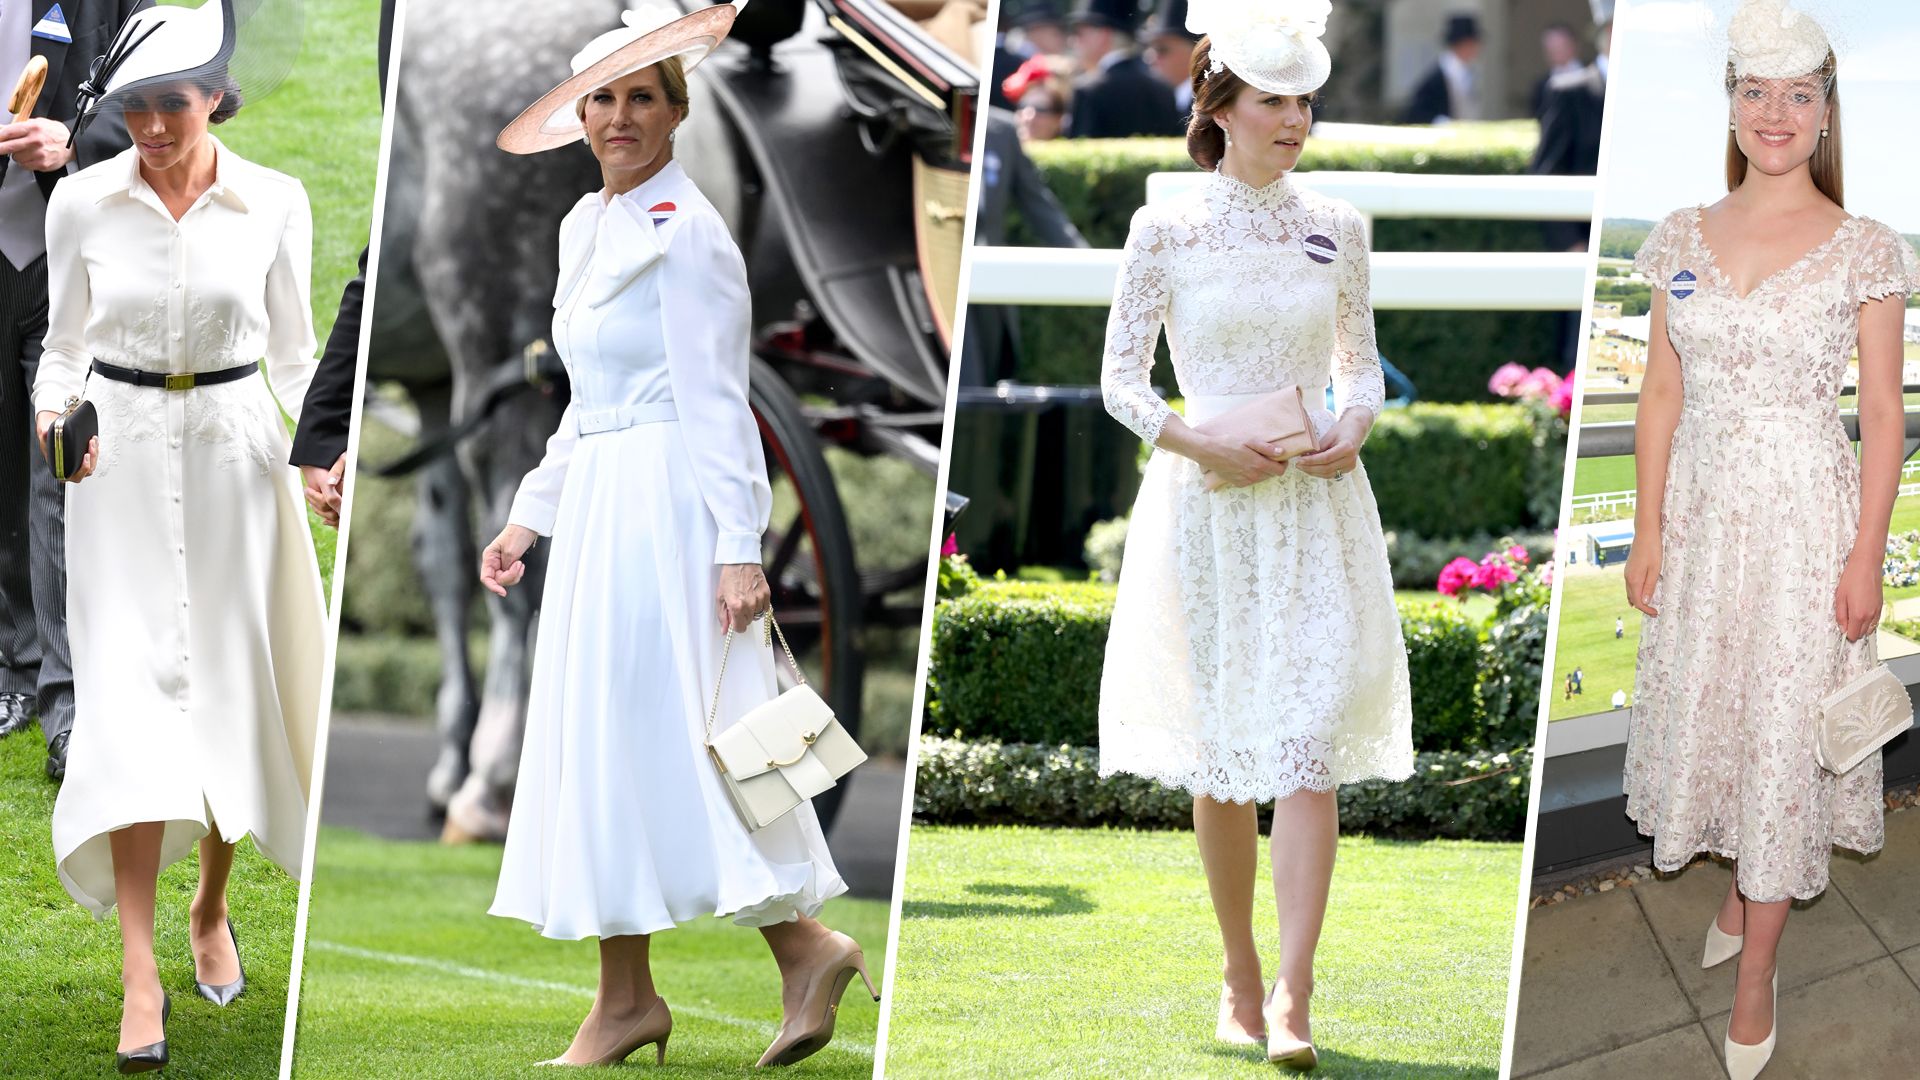 Meghan Markle, Sophie Wessex, Kate Middleton and Flora Vesterberg in white dresses at Ascot